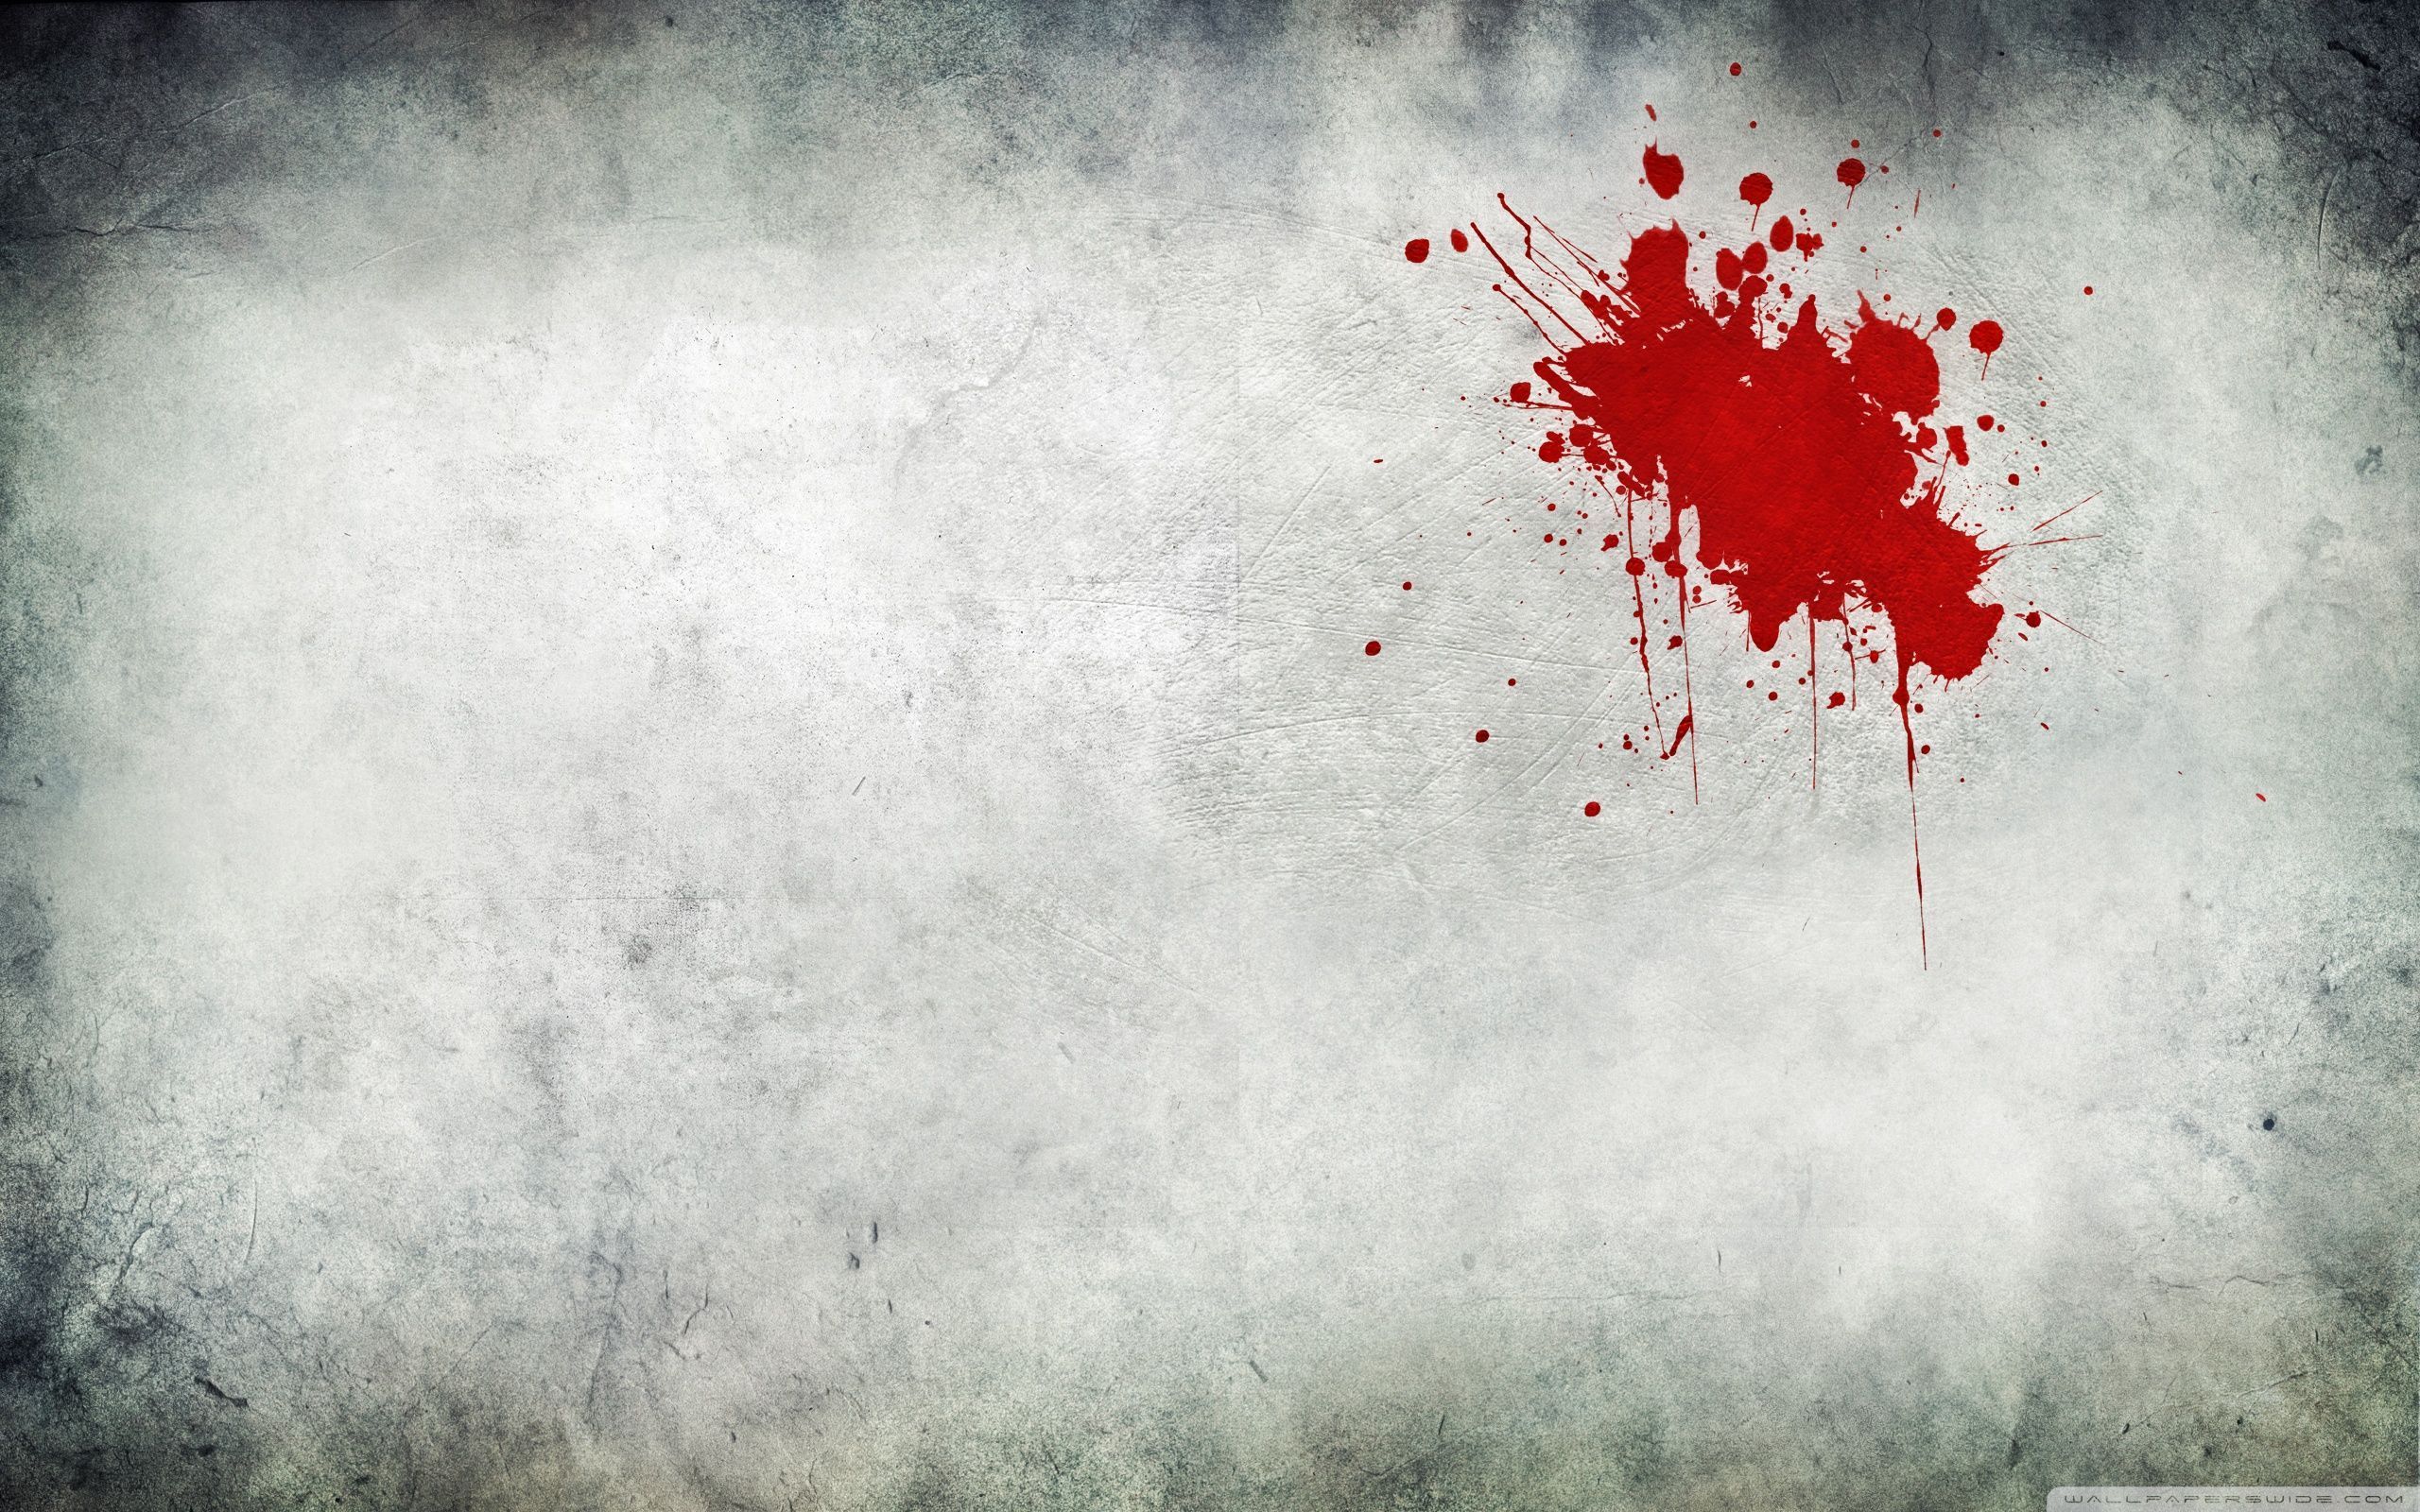 Blood on the wall wallpaper - Blood